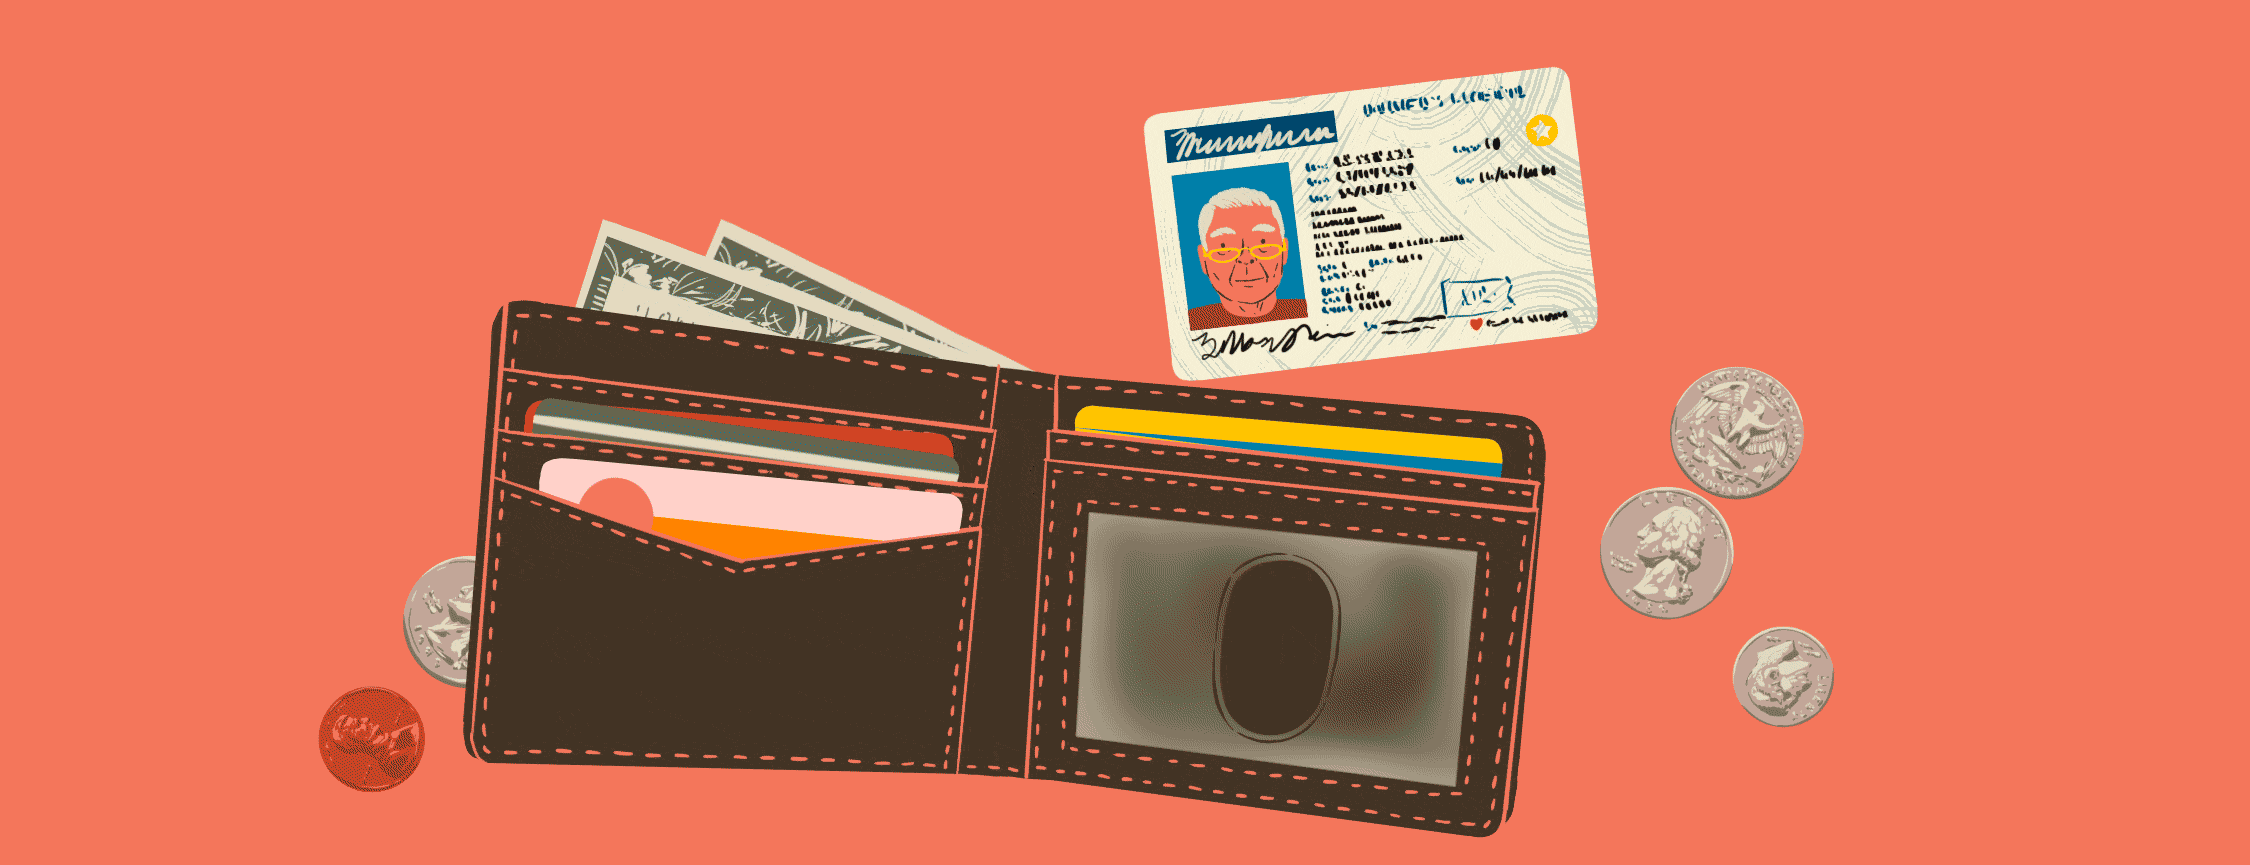 A wallet is open with coins scattered around it and several bills poking out of the billfold. A driver's license is next to the wallet, and a hand reaches out to slide it out of frame.